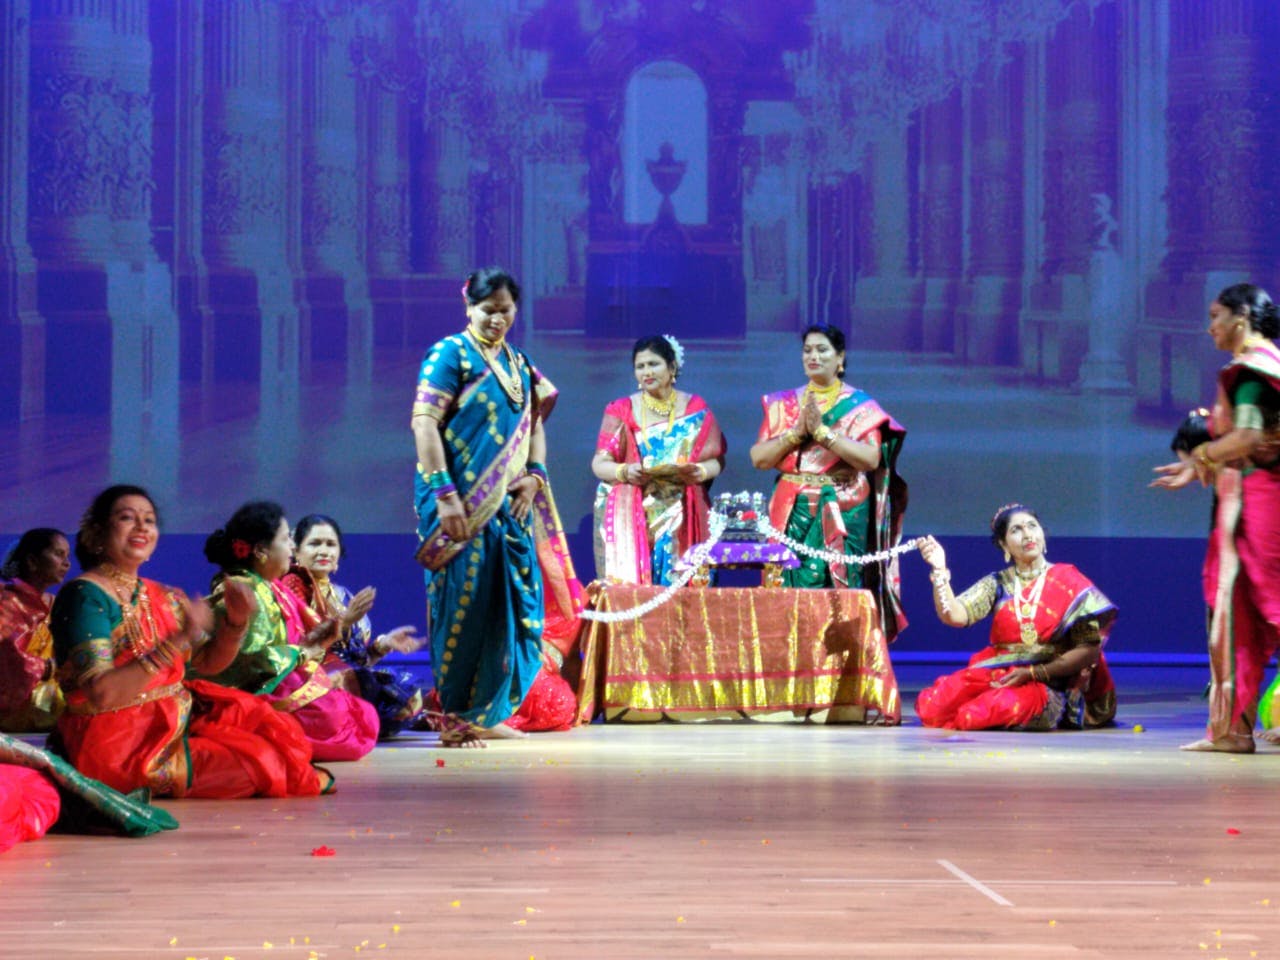 Cover Image for Marathi Magic Takes Dubai by Storm: Senior Citizens Shine in Cultural Extravaganza!